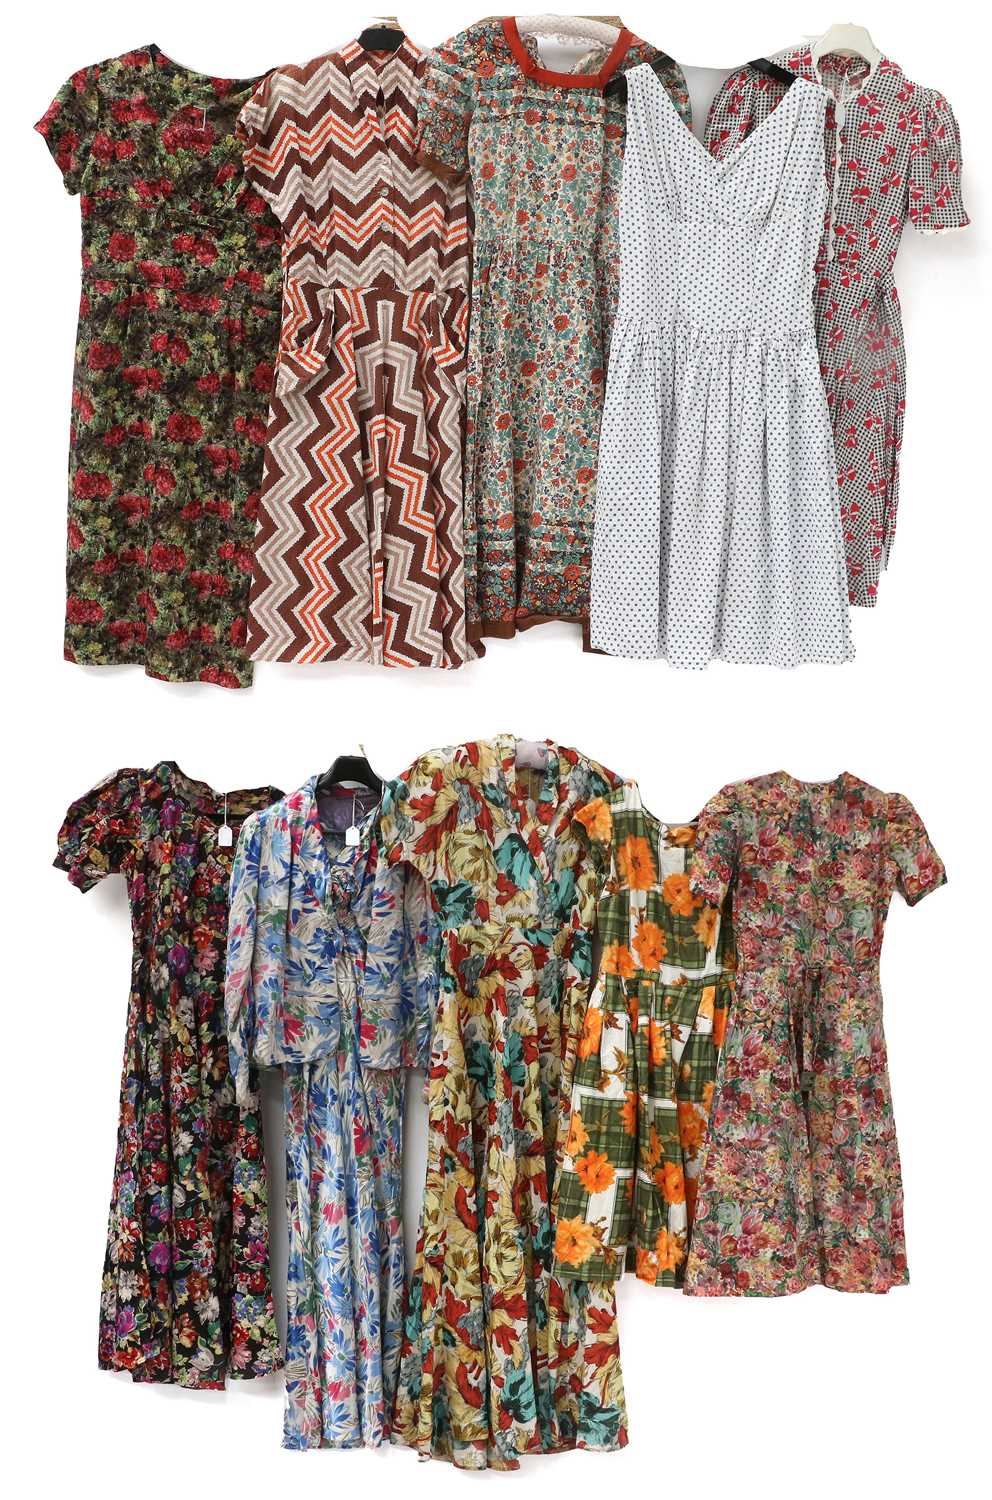 Circa 1930s-50s Floral Printed and Other Evening and Day Wear Dresses, comprising Fred Howard